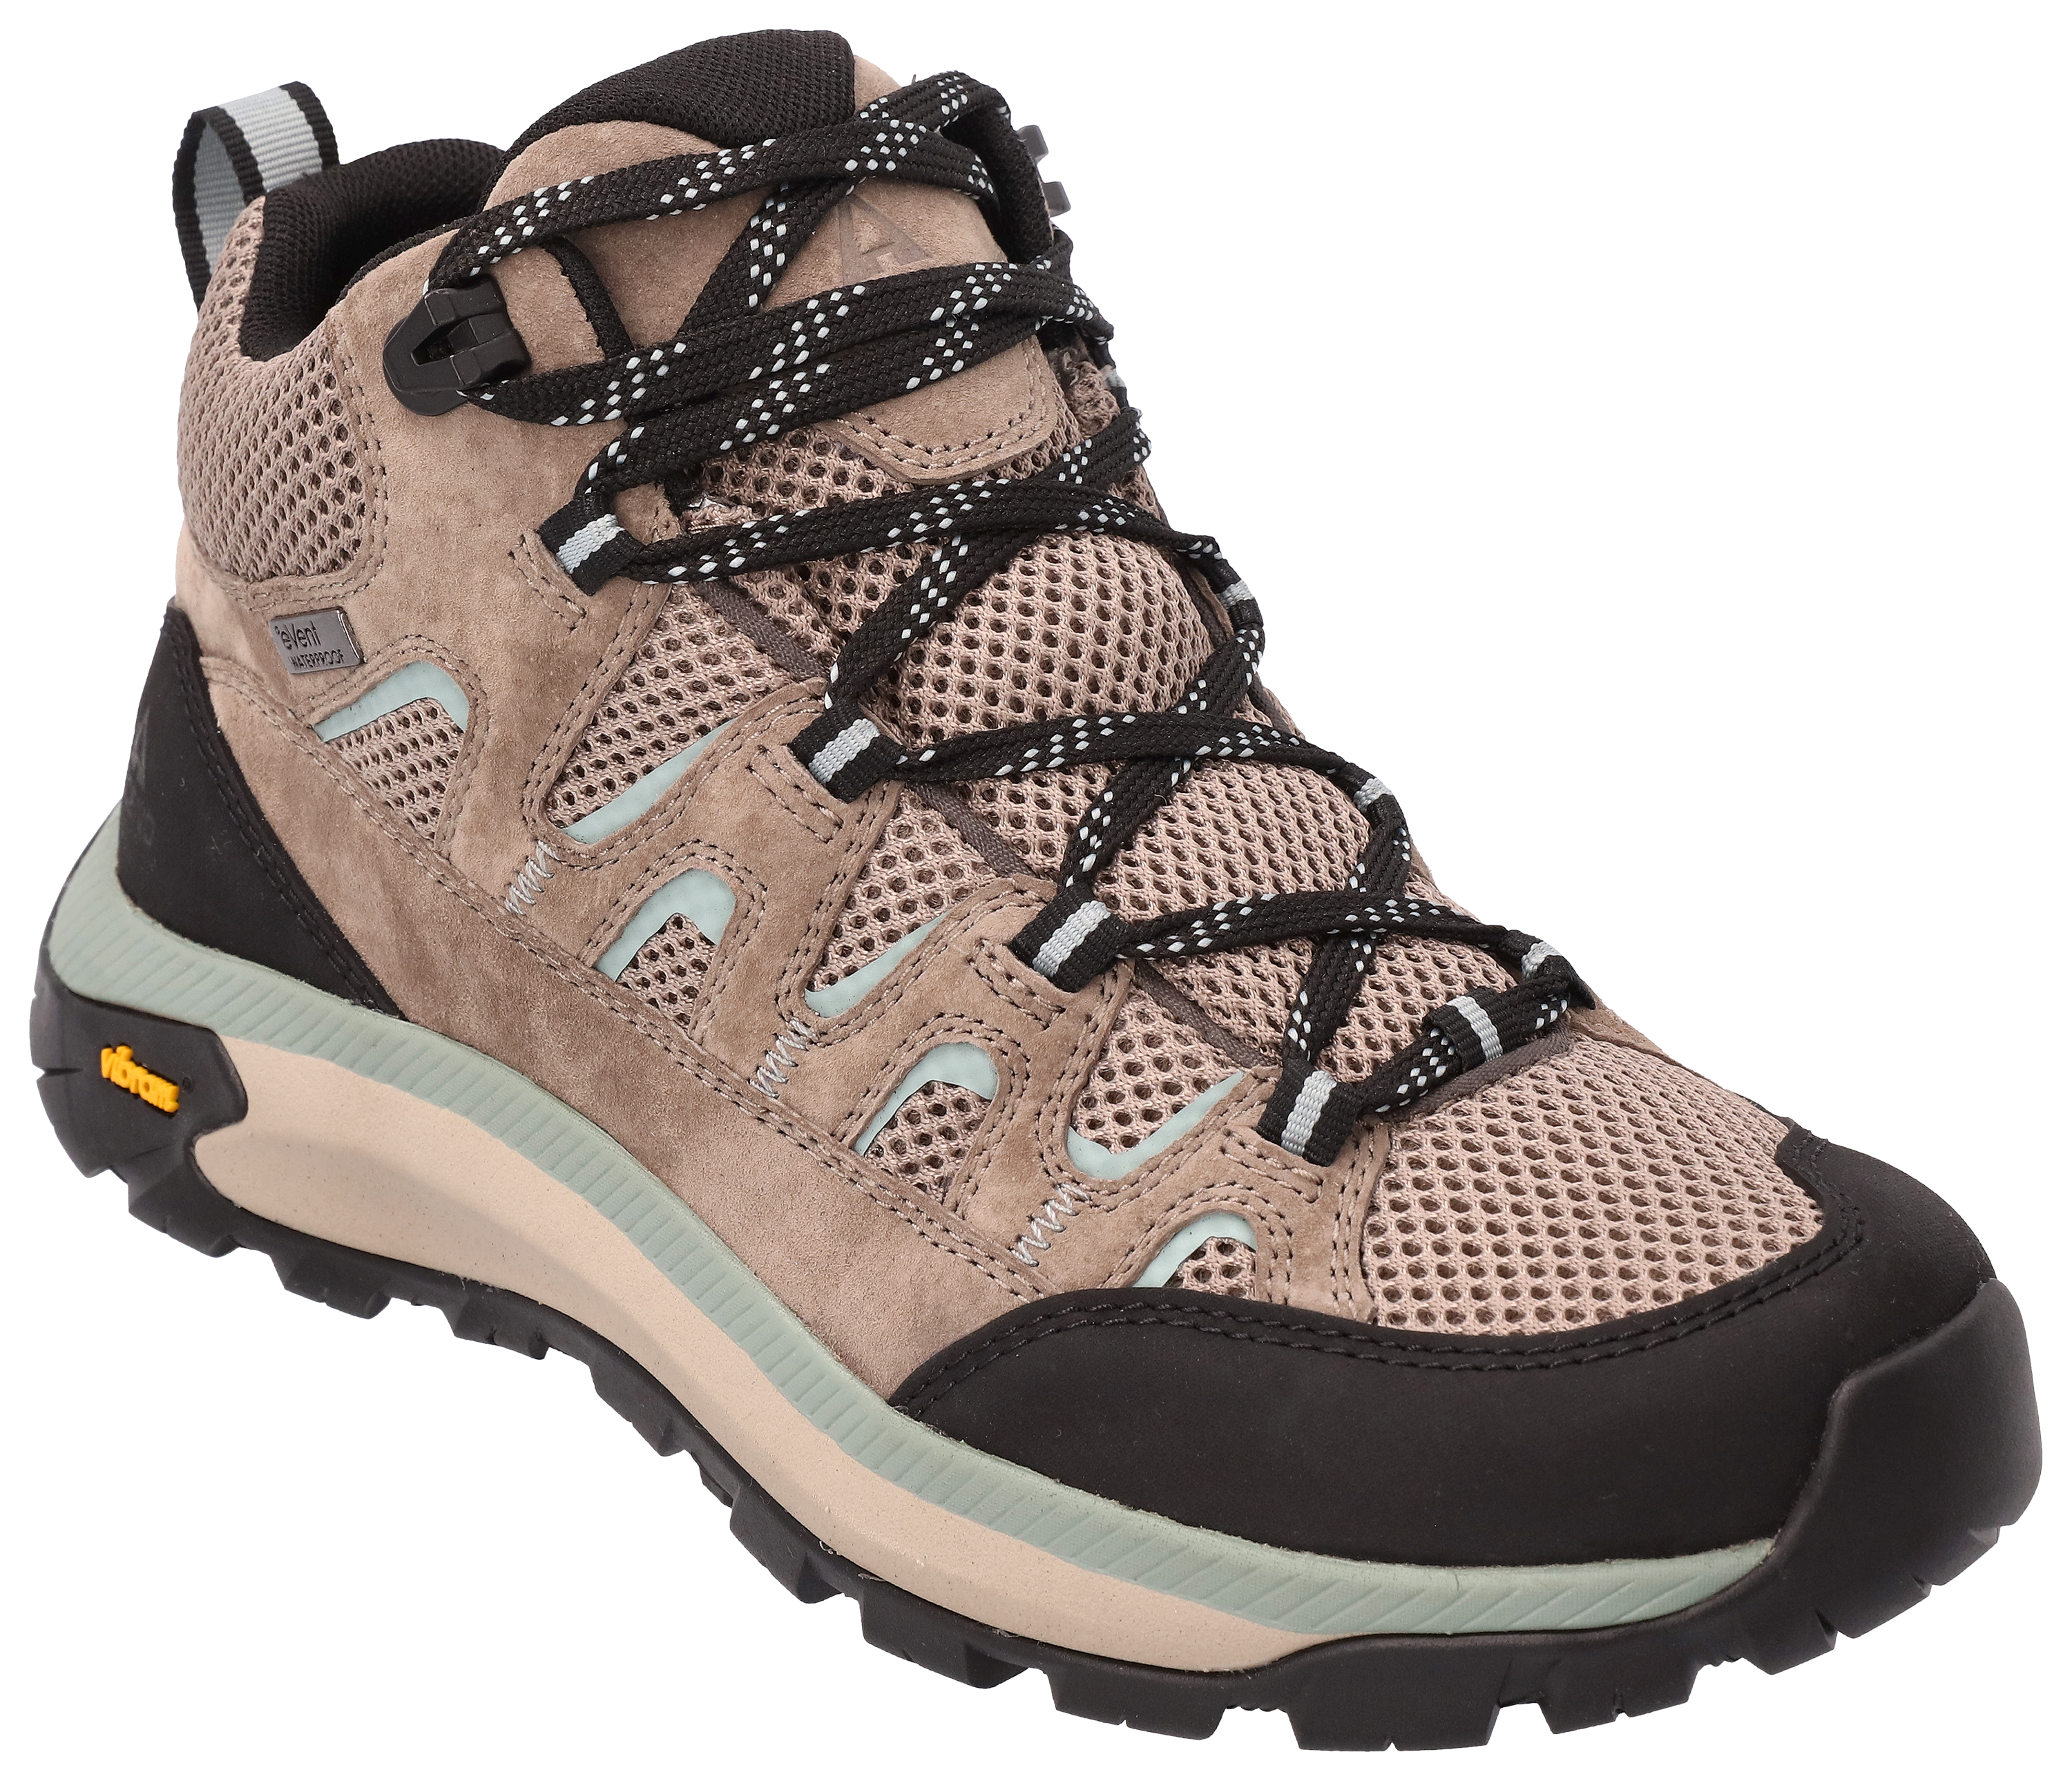 Ascend Mojave Mid Waterproof Hiking Boots for Ladies